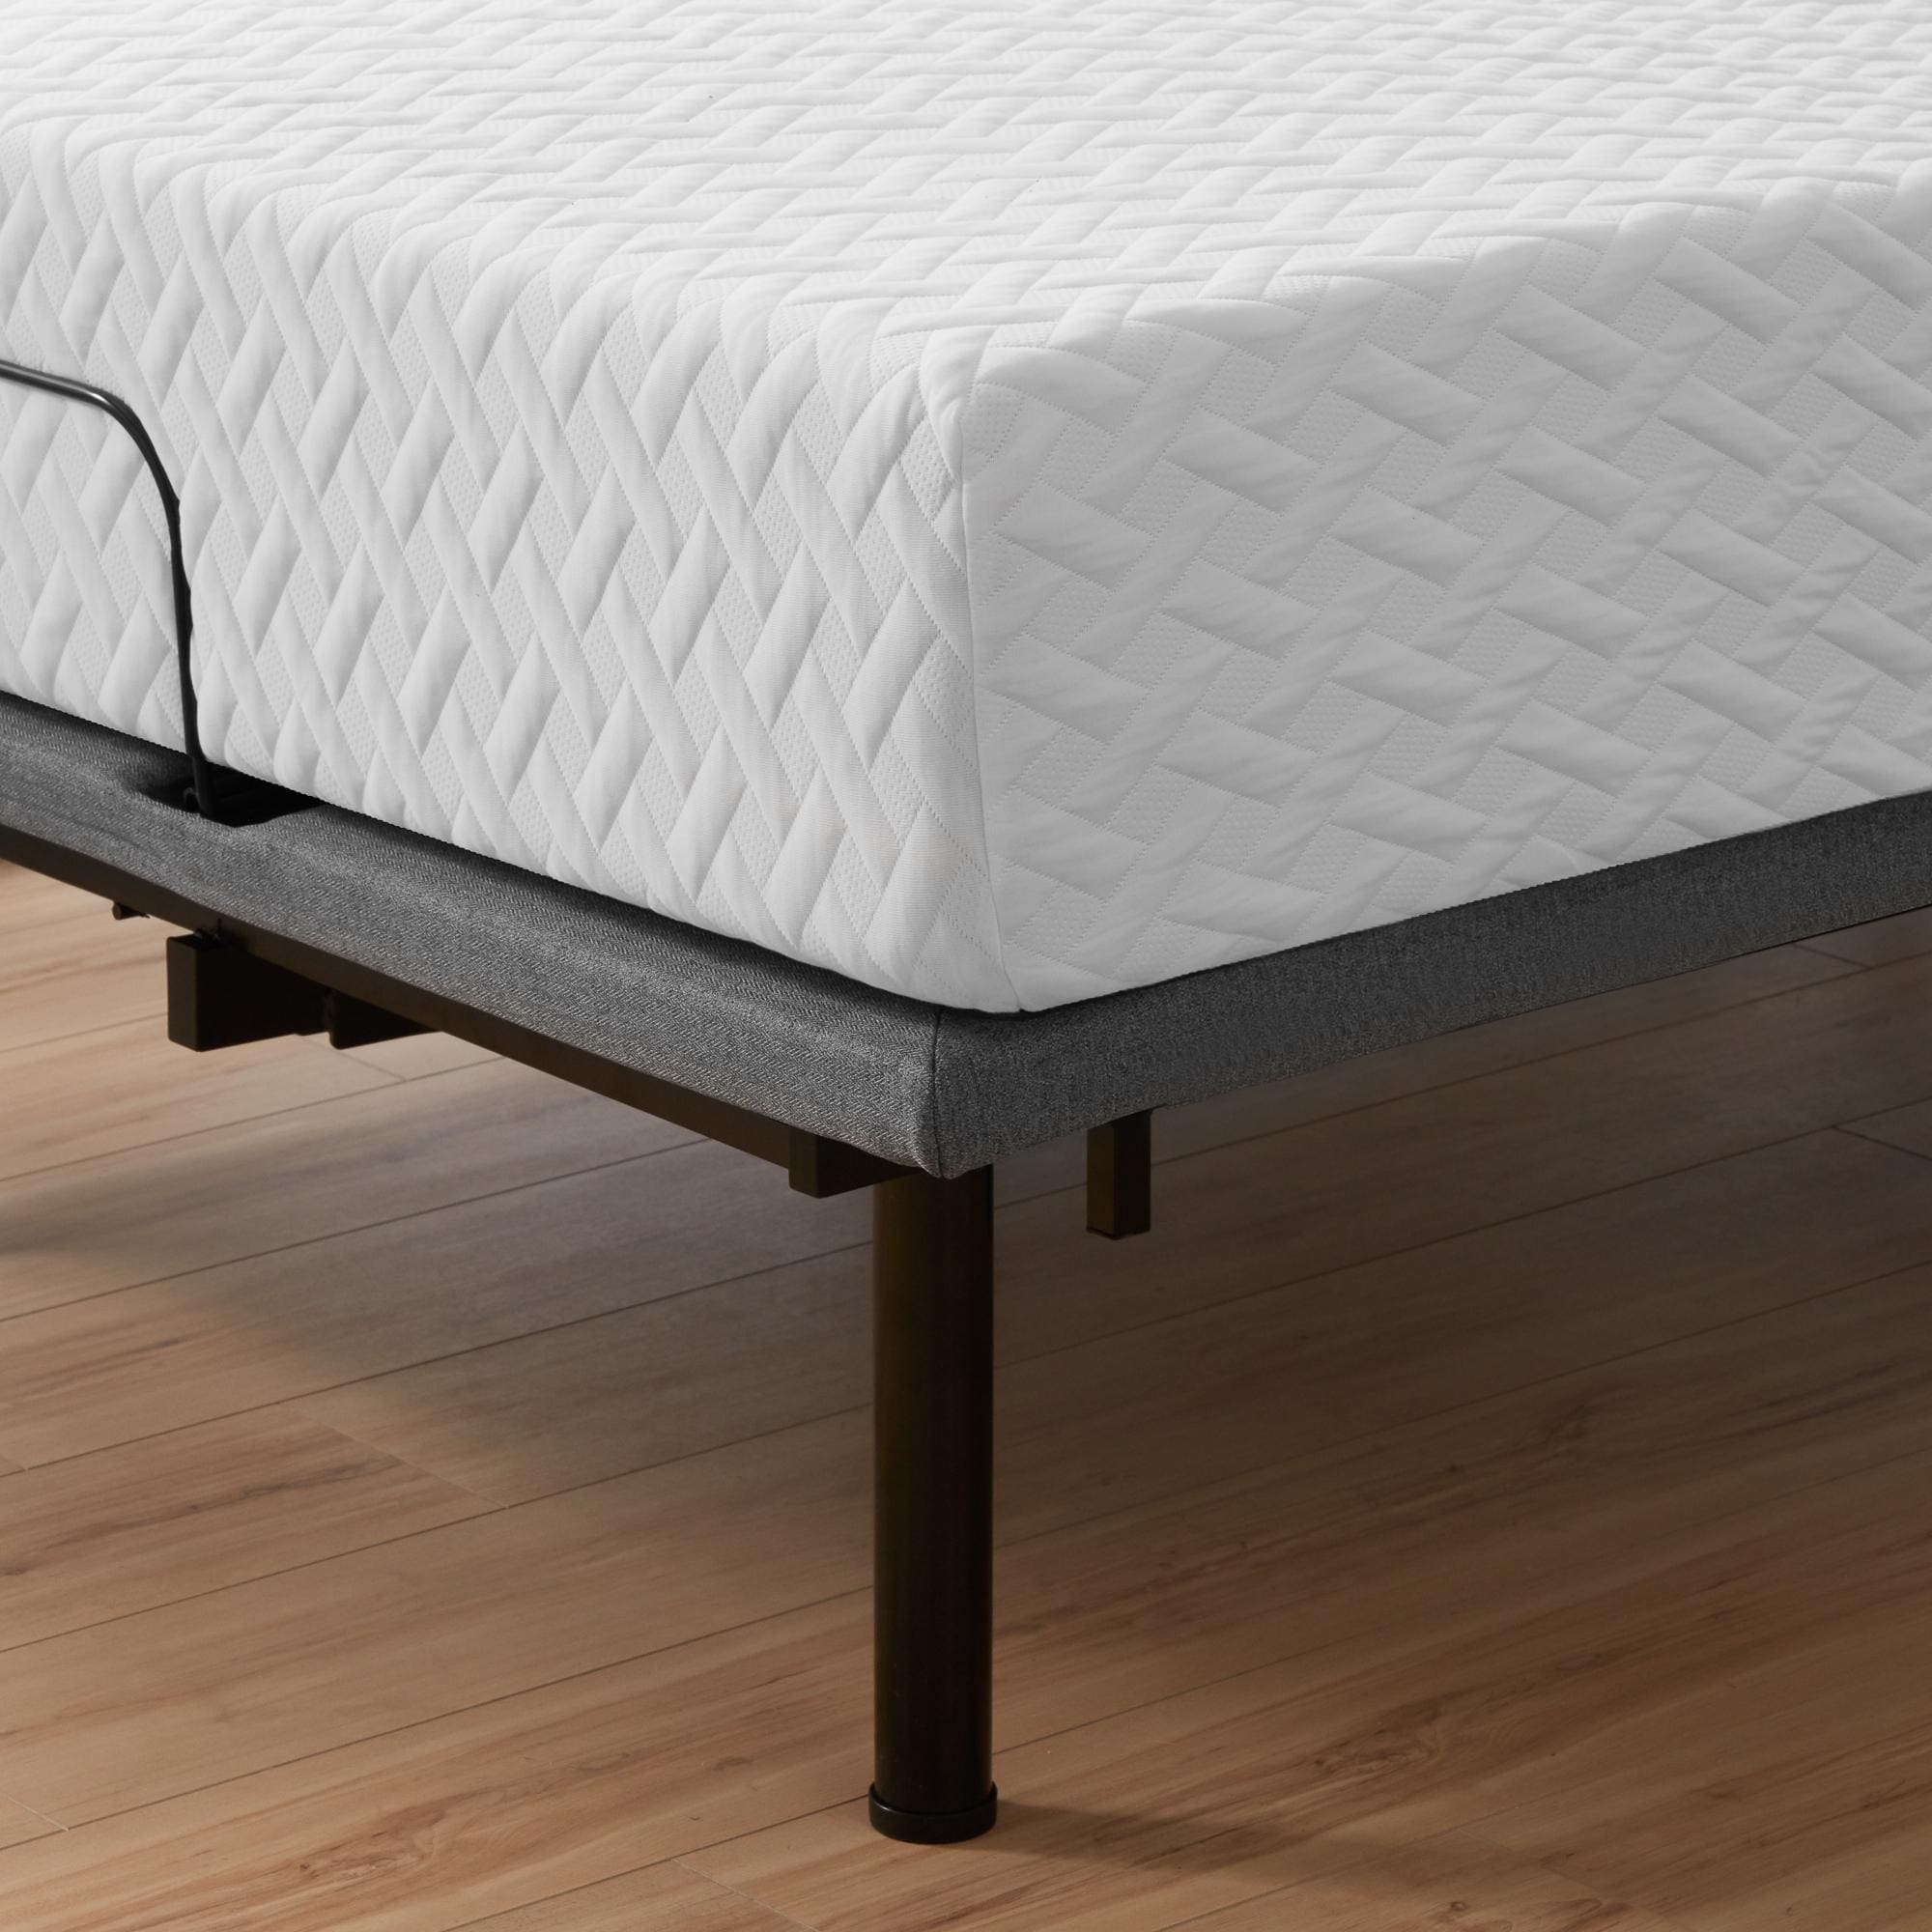 Lucid Comfort Collection 10-inch Gel Memory Foam Mattress and